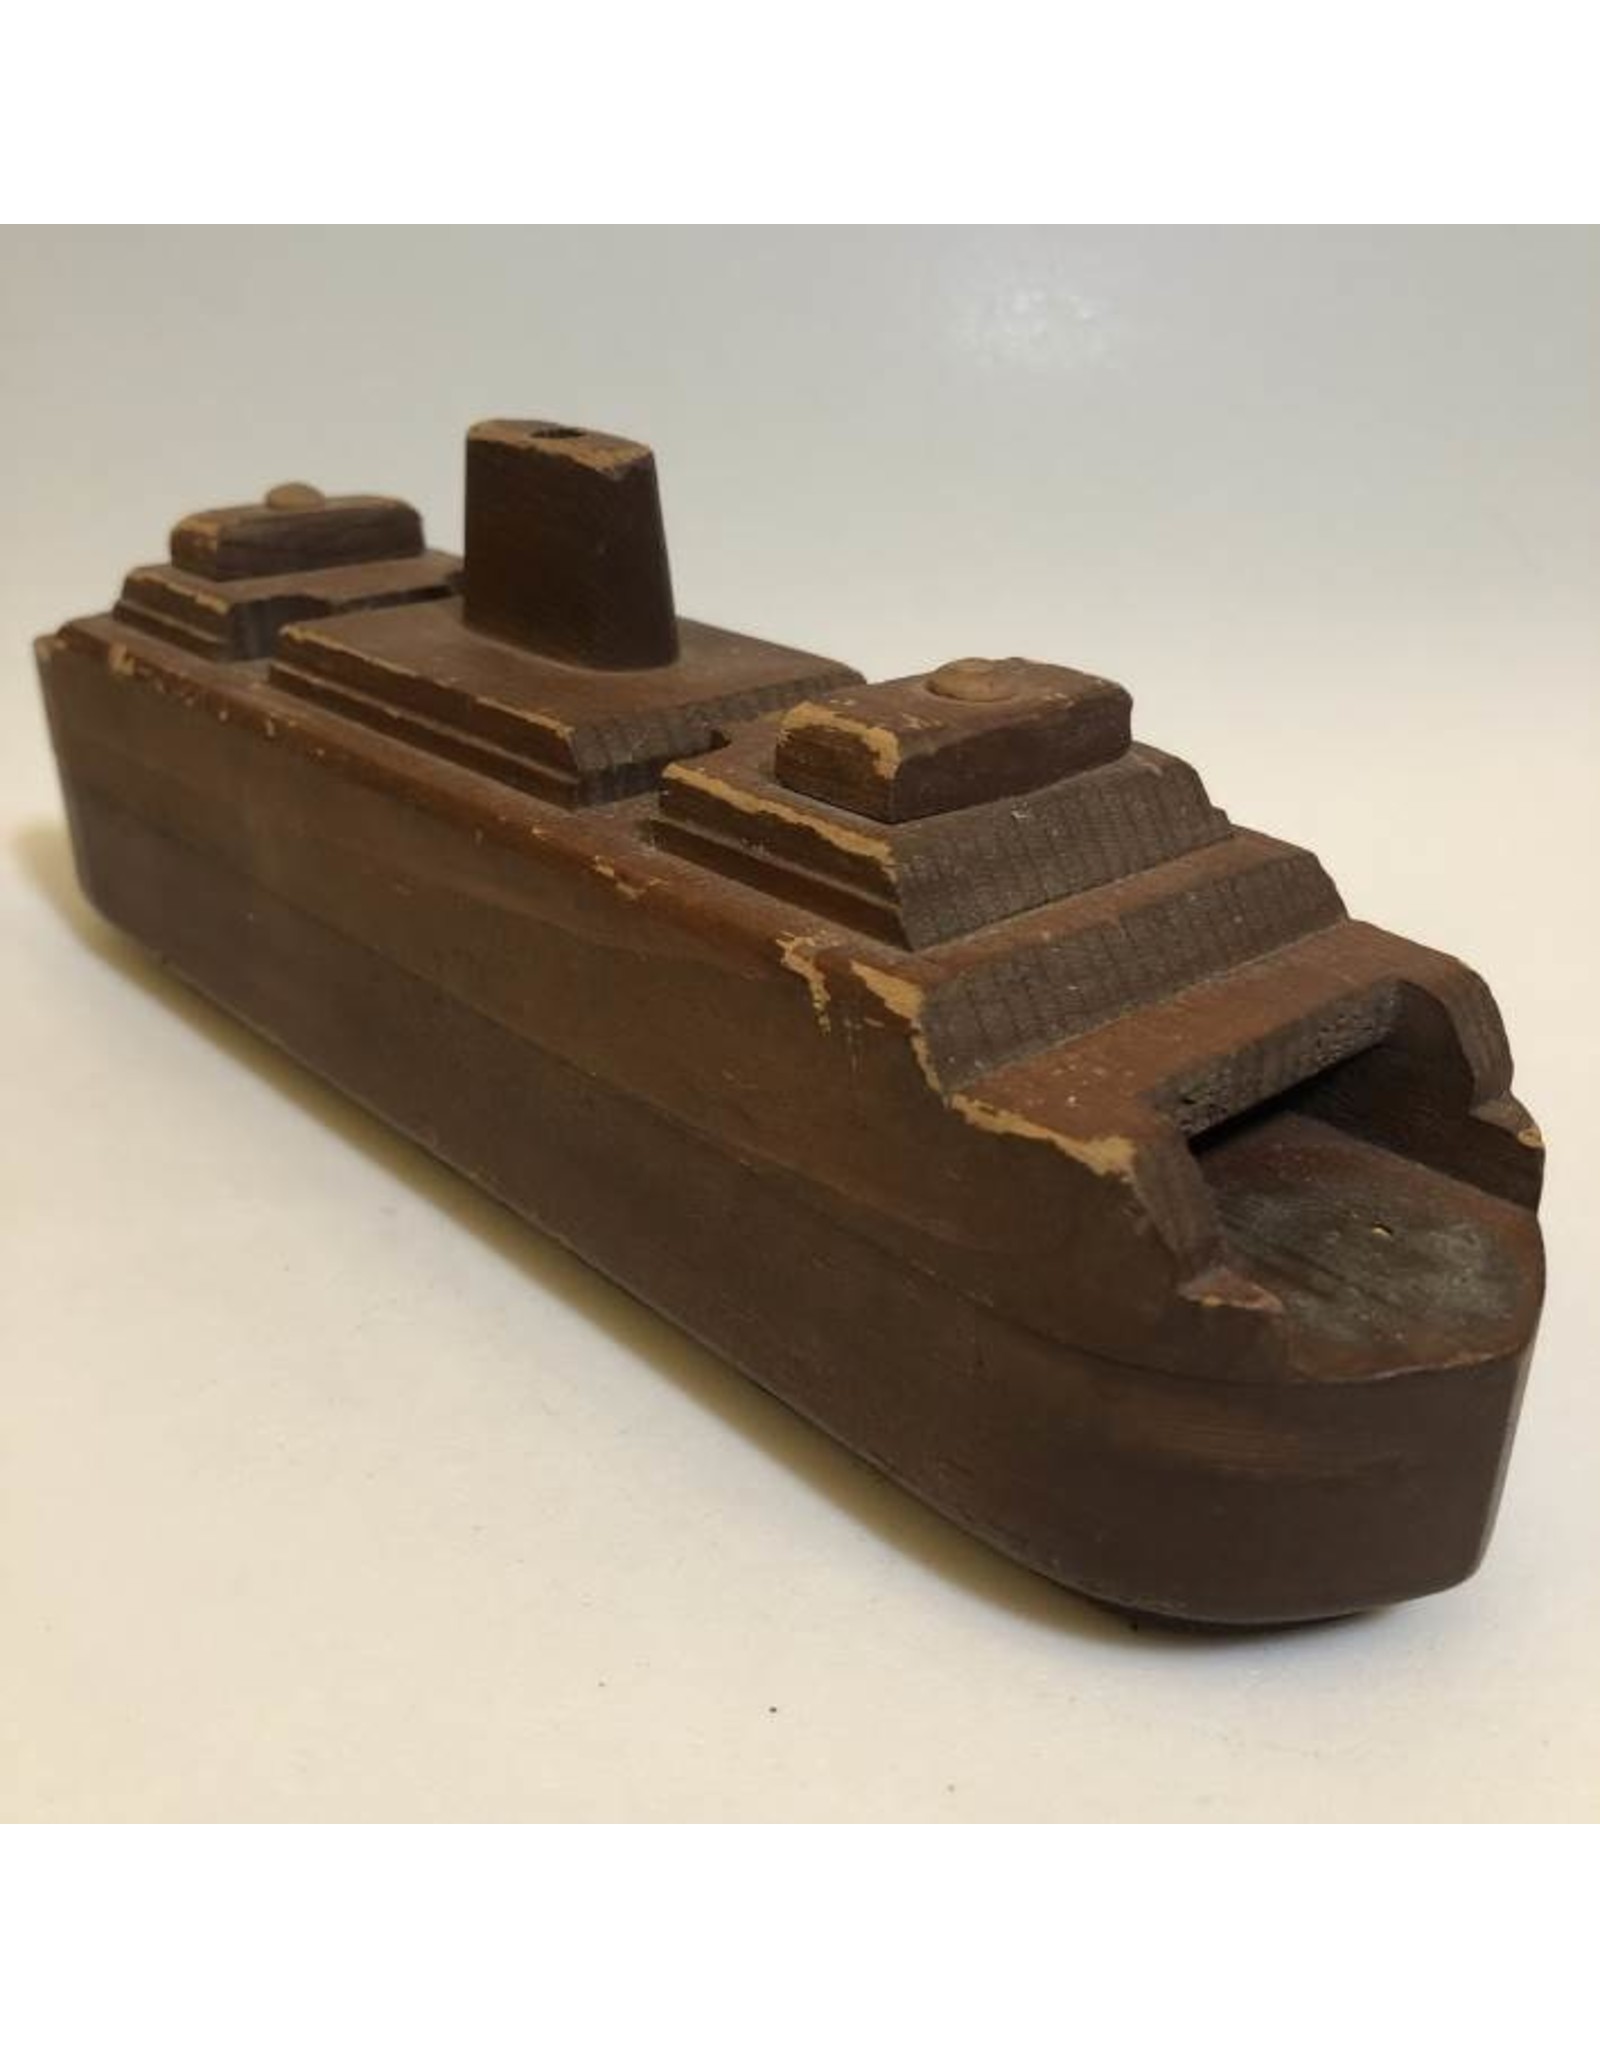 Model ship - wooden, handcarved, BC Ferry